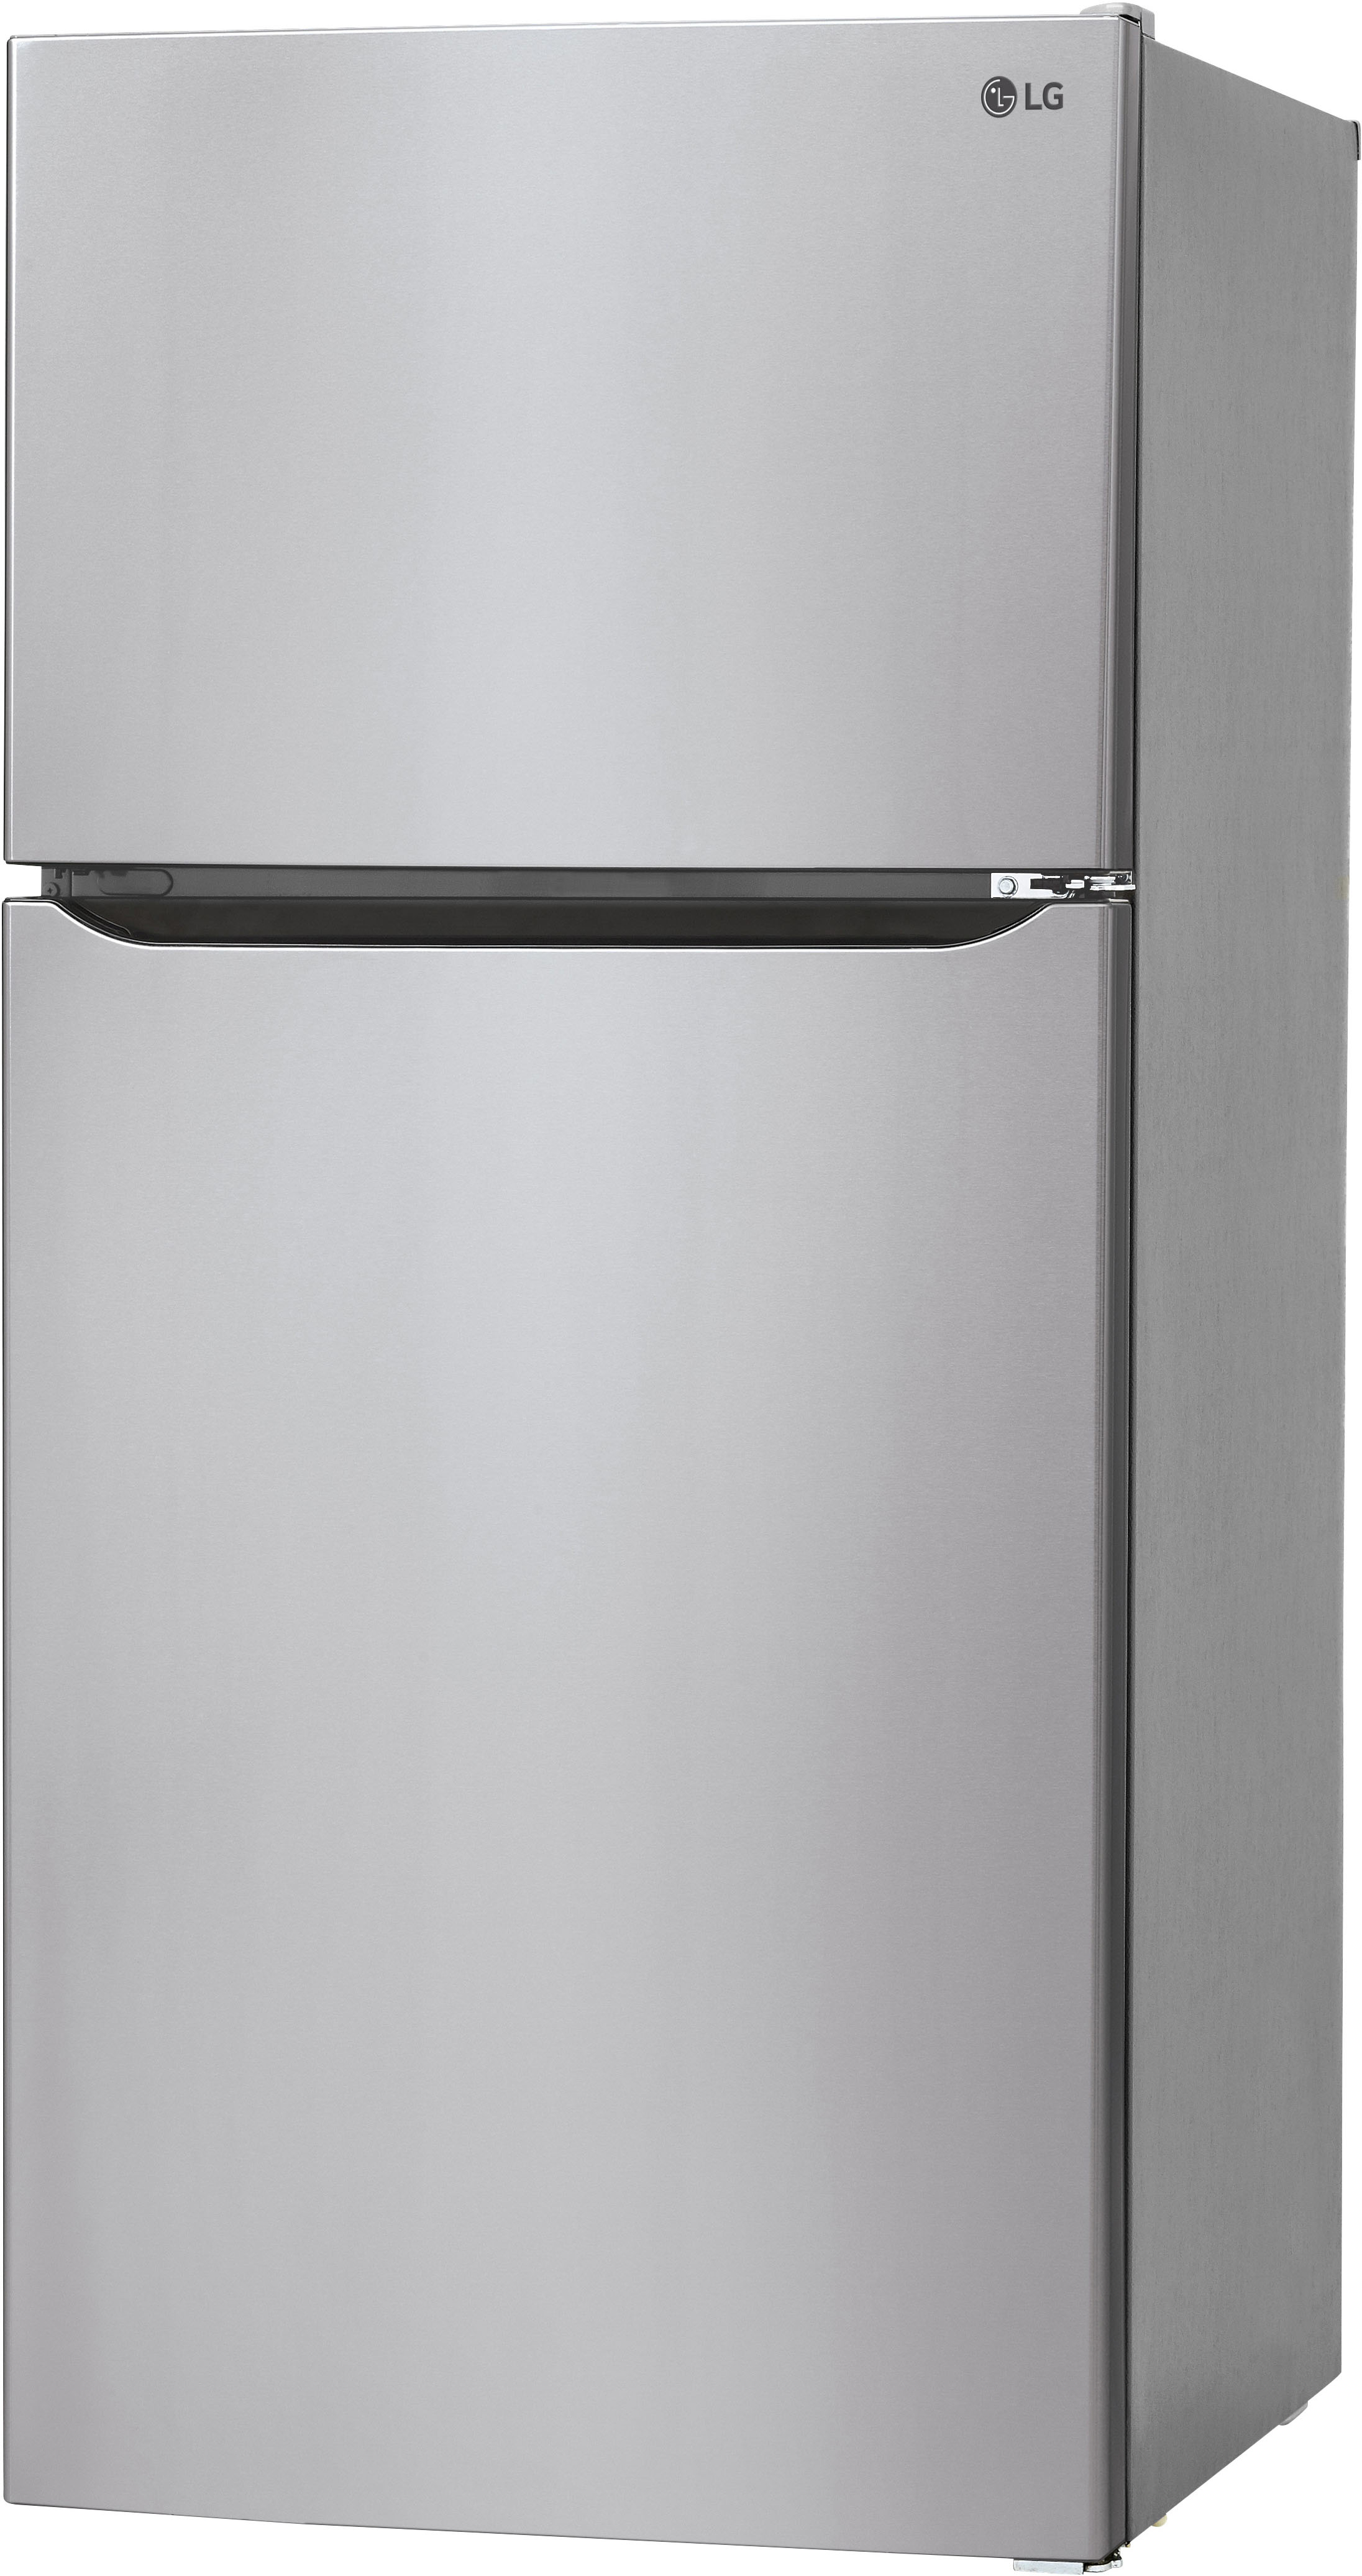 Angle View: LG - 23.8 Cu Ft Top Mount Refrigerator with Internal Water Dispenser - Stainless steel